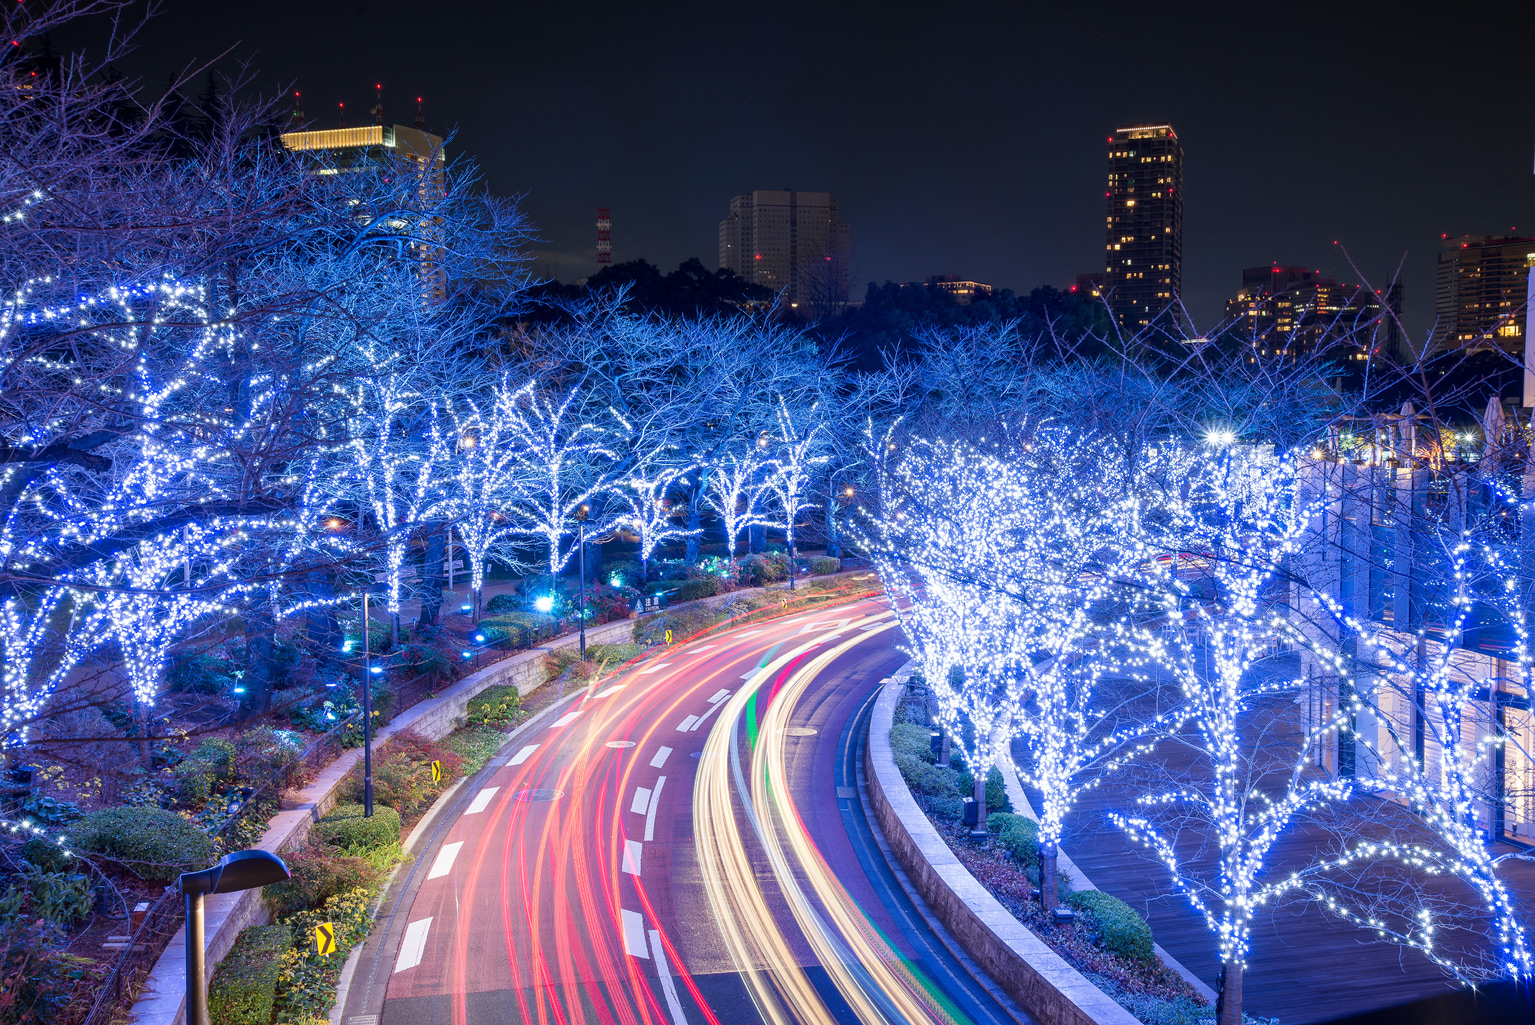 The Best 15 Winter Illuminations and Christmas Lights in and Around Tokyo